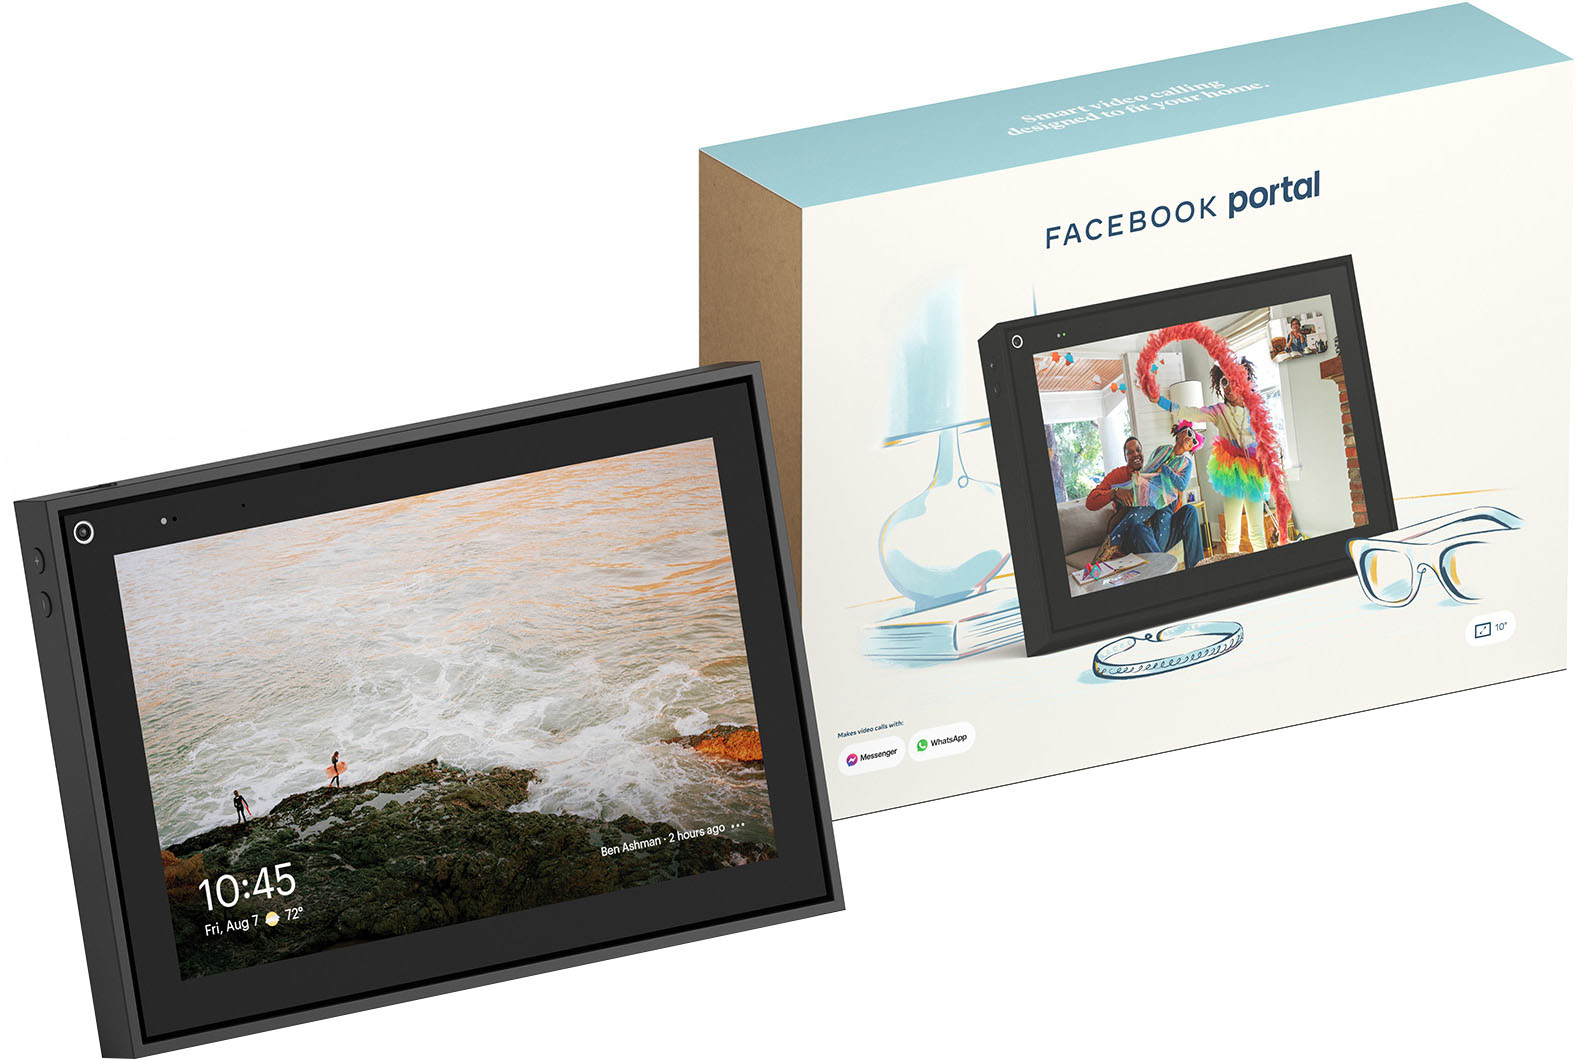 Facebook Portal Hot Early Black Friday Deal at Best Buy!